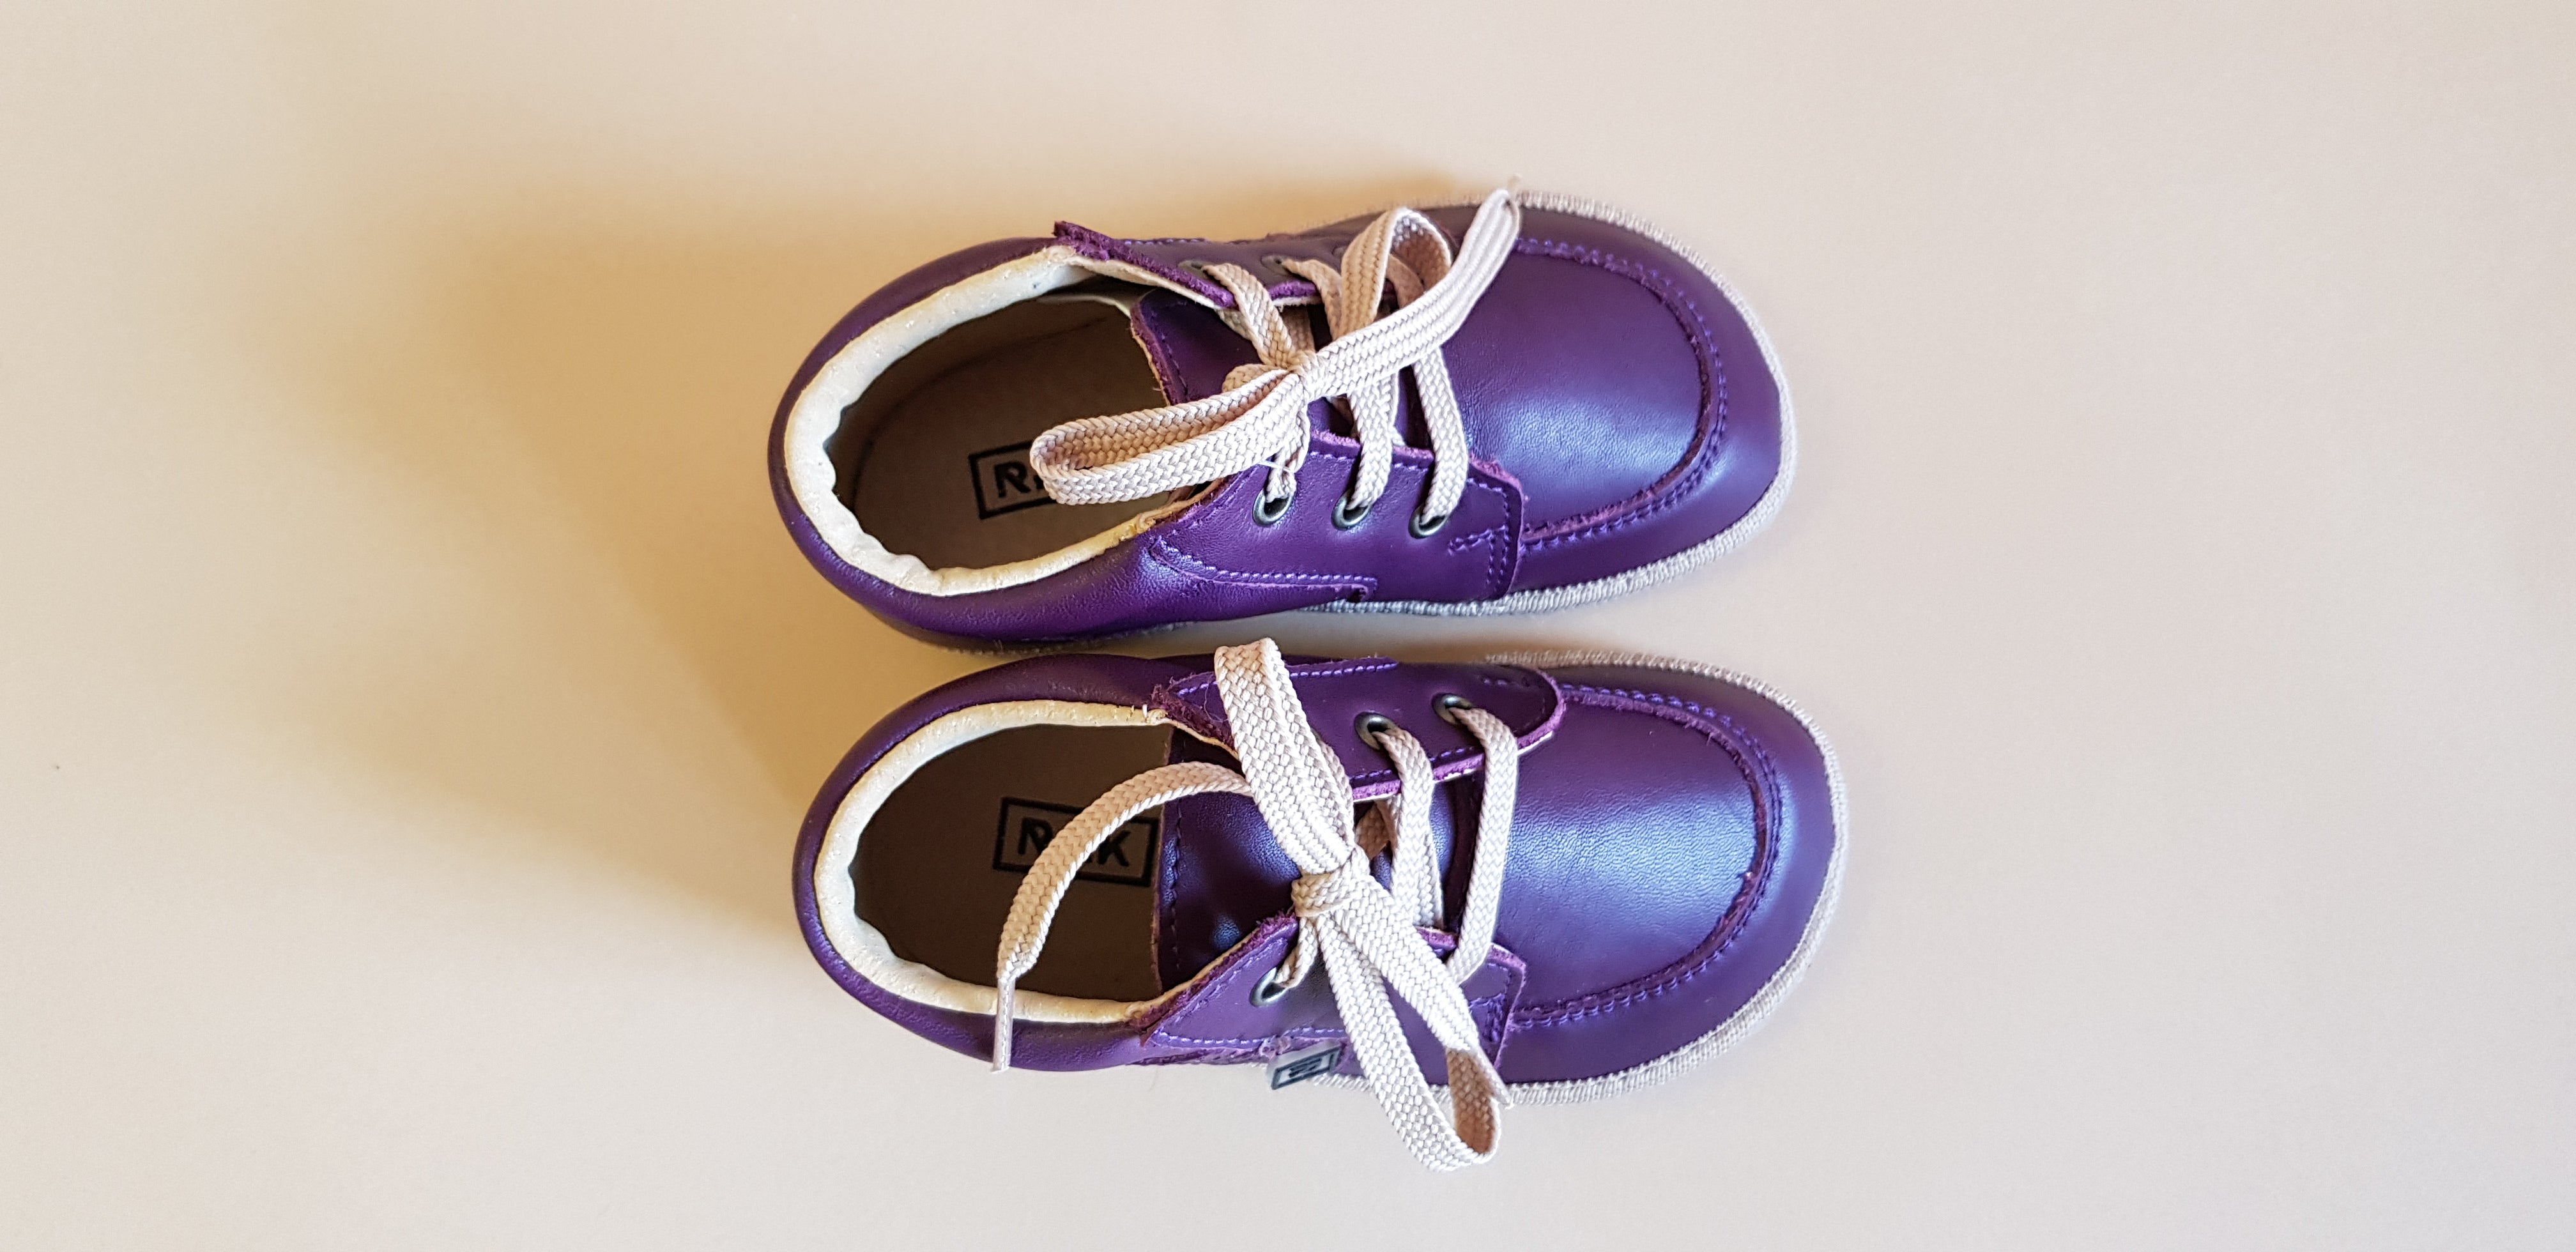 First Walking shoes with laces - Purple